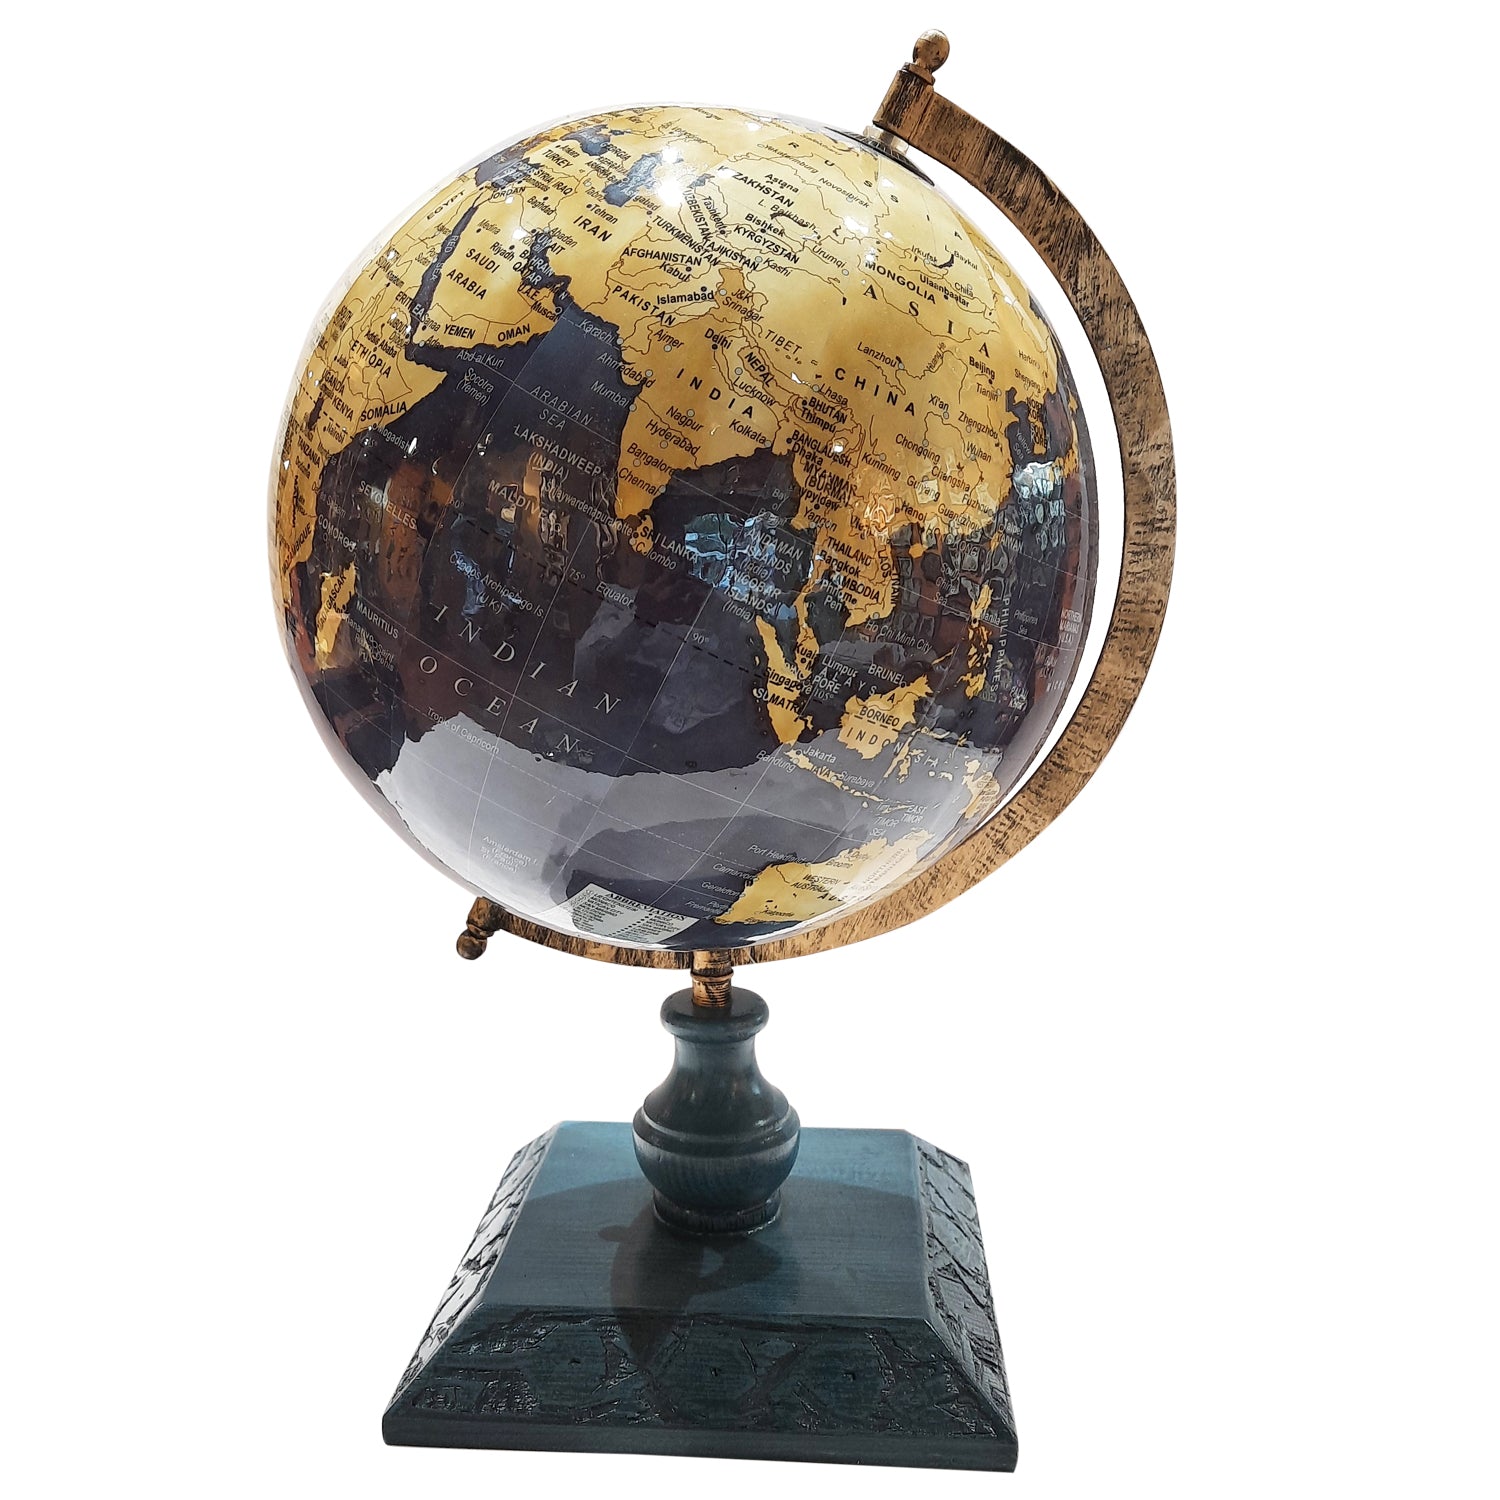 The Bombay Store Antique Globe with Wooden Base